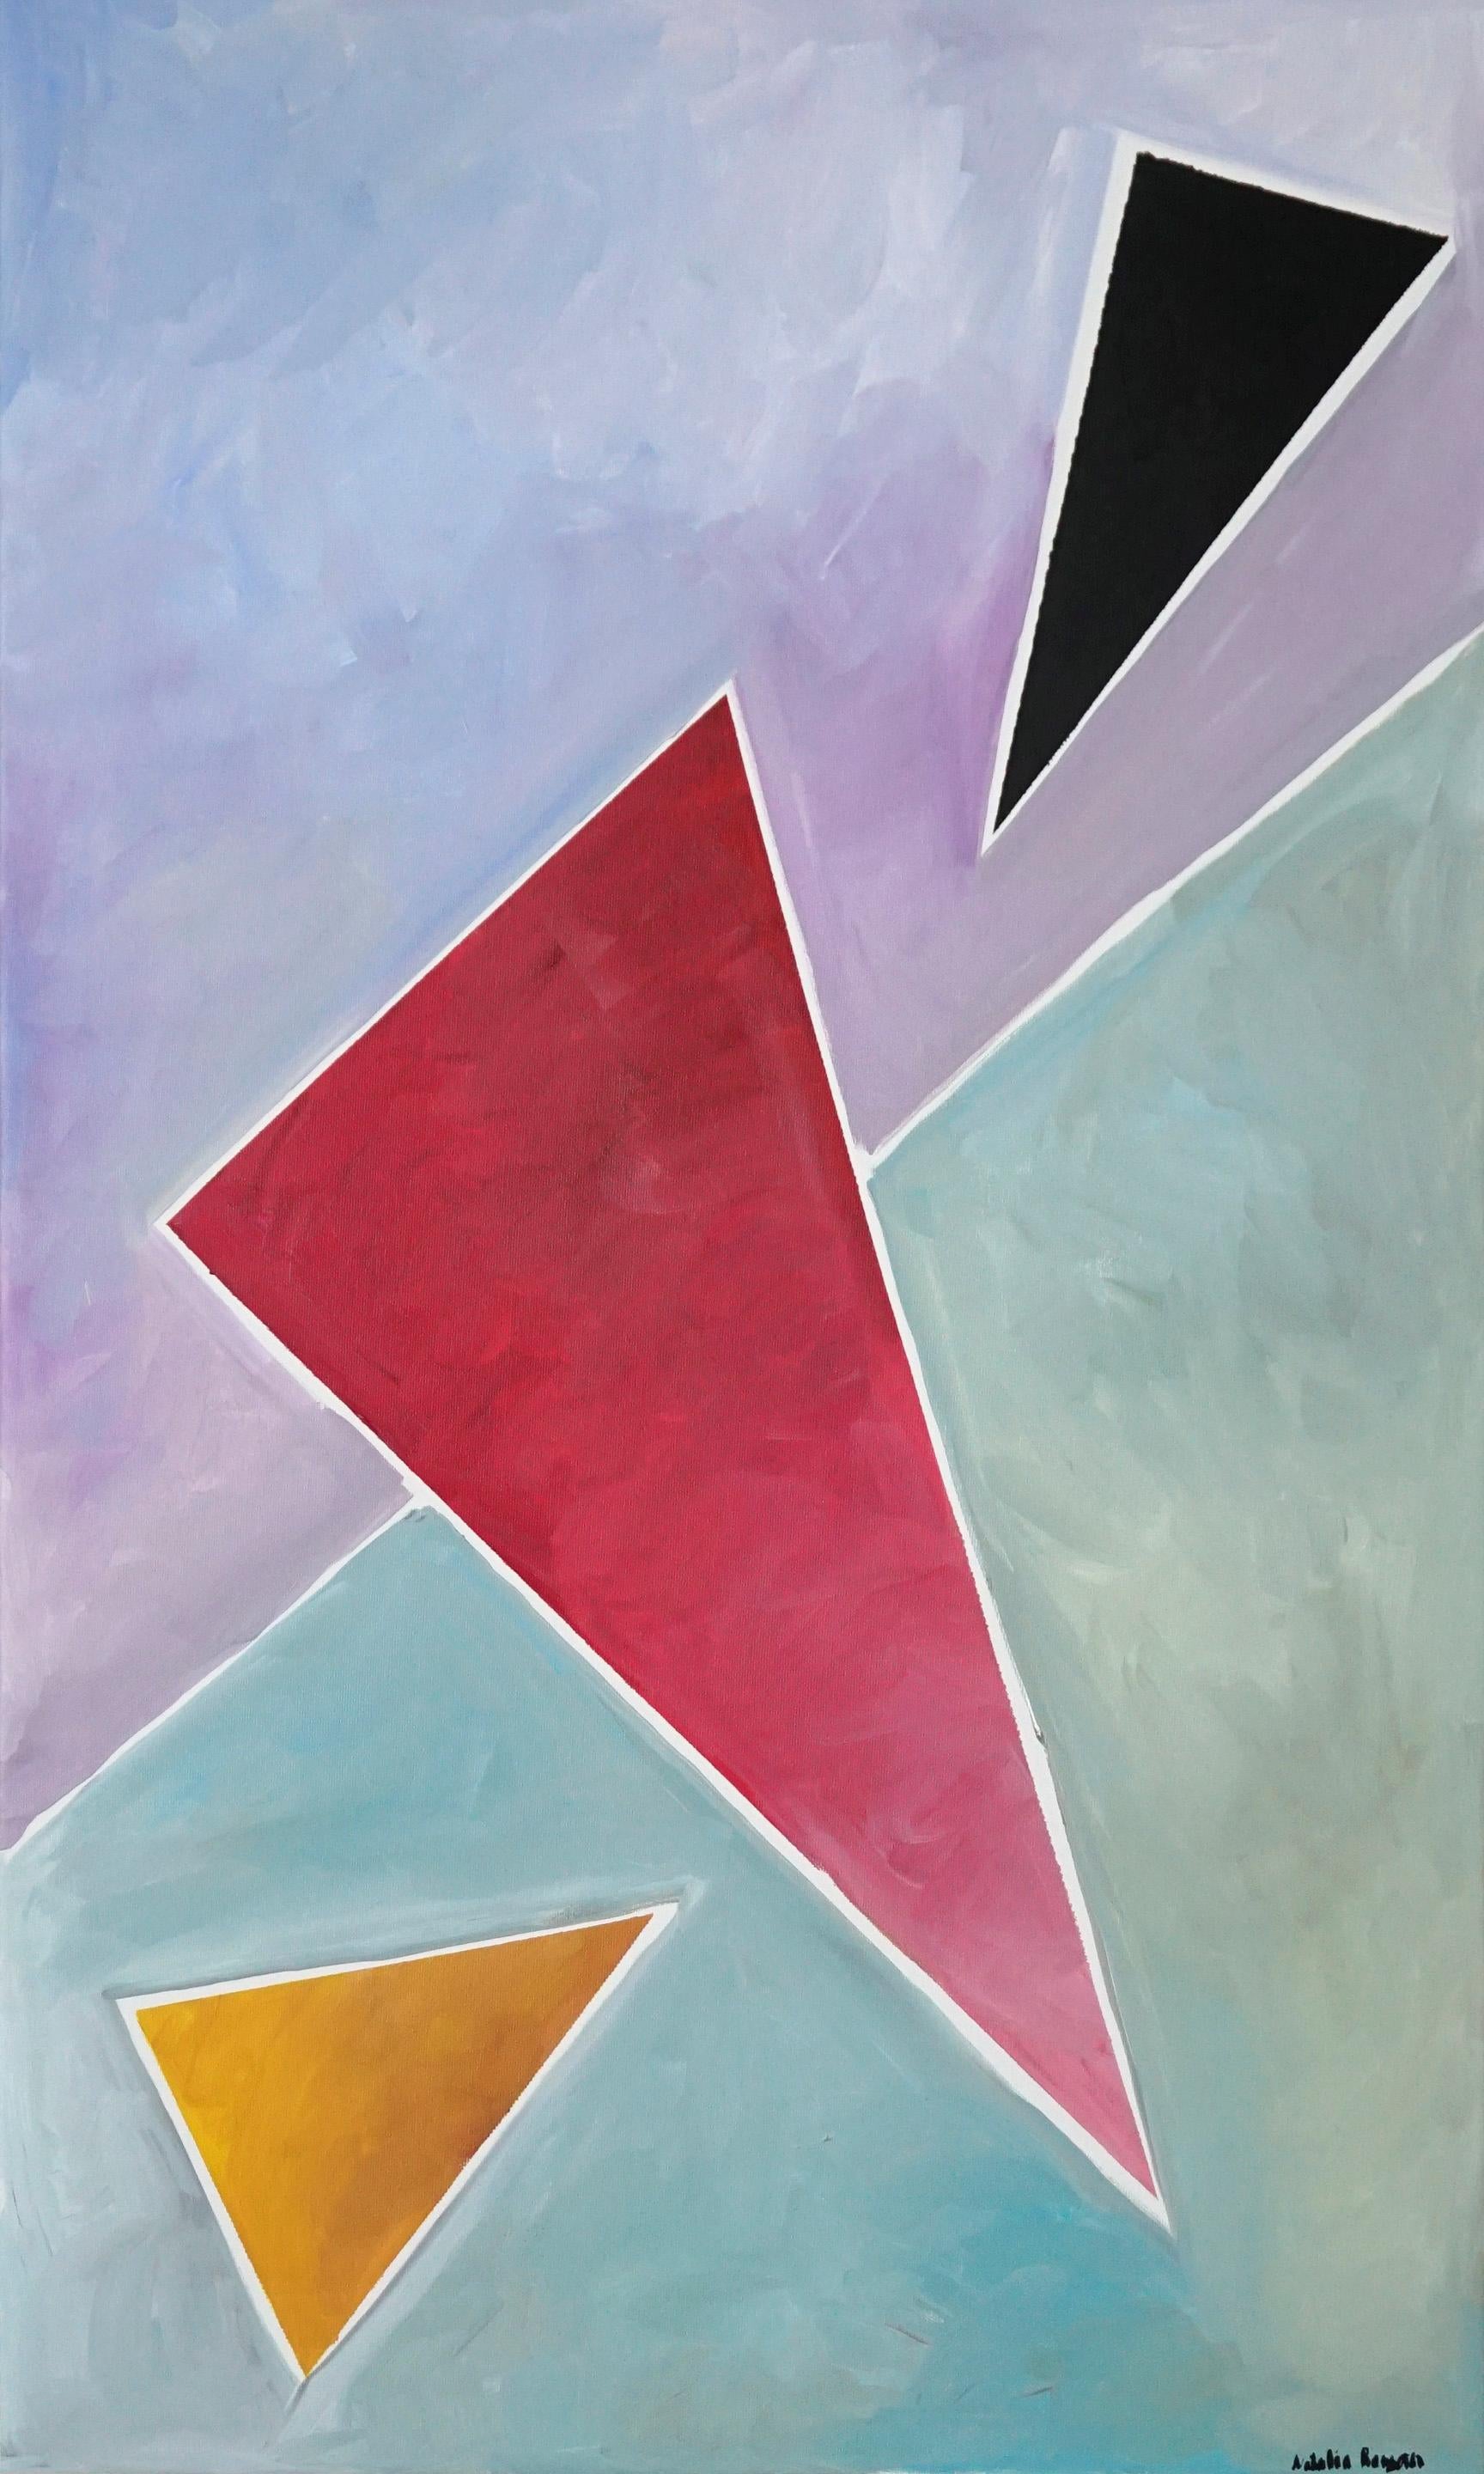 Diagonal Triangle Dream, Abstract Geometric Painting on Linen, Pastel Tones 2021